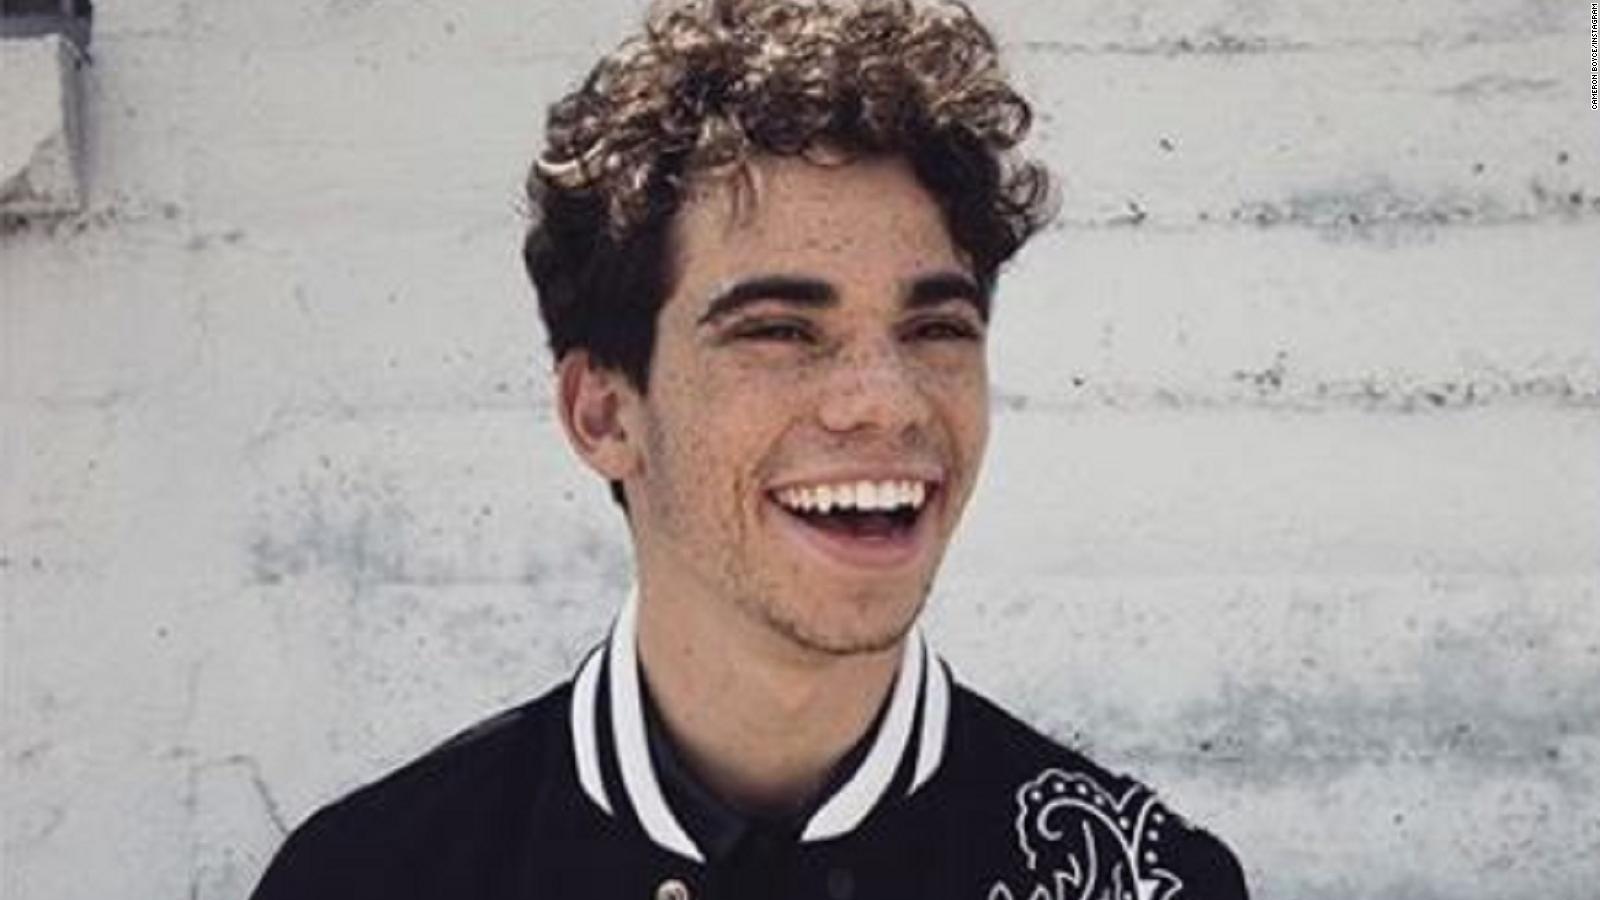 Disney actor from 'Jessie' Cameron Boyce dies at age 20